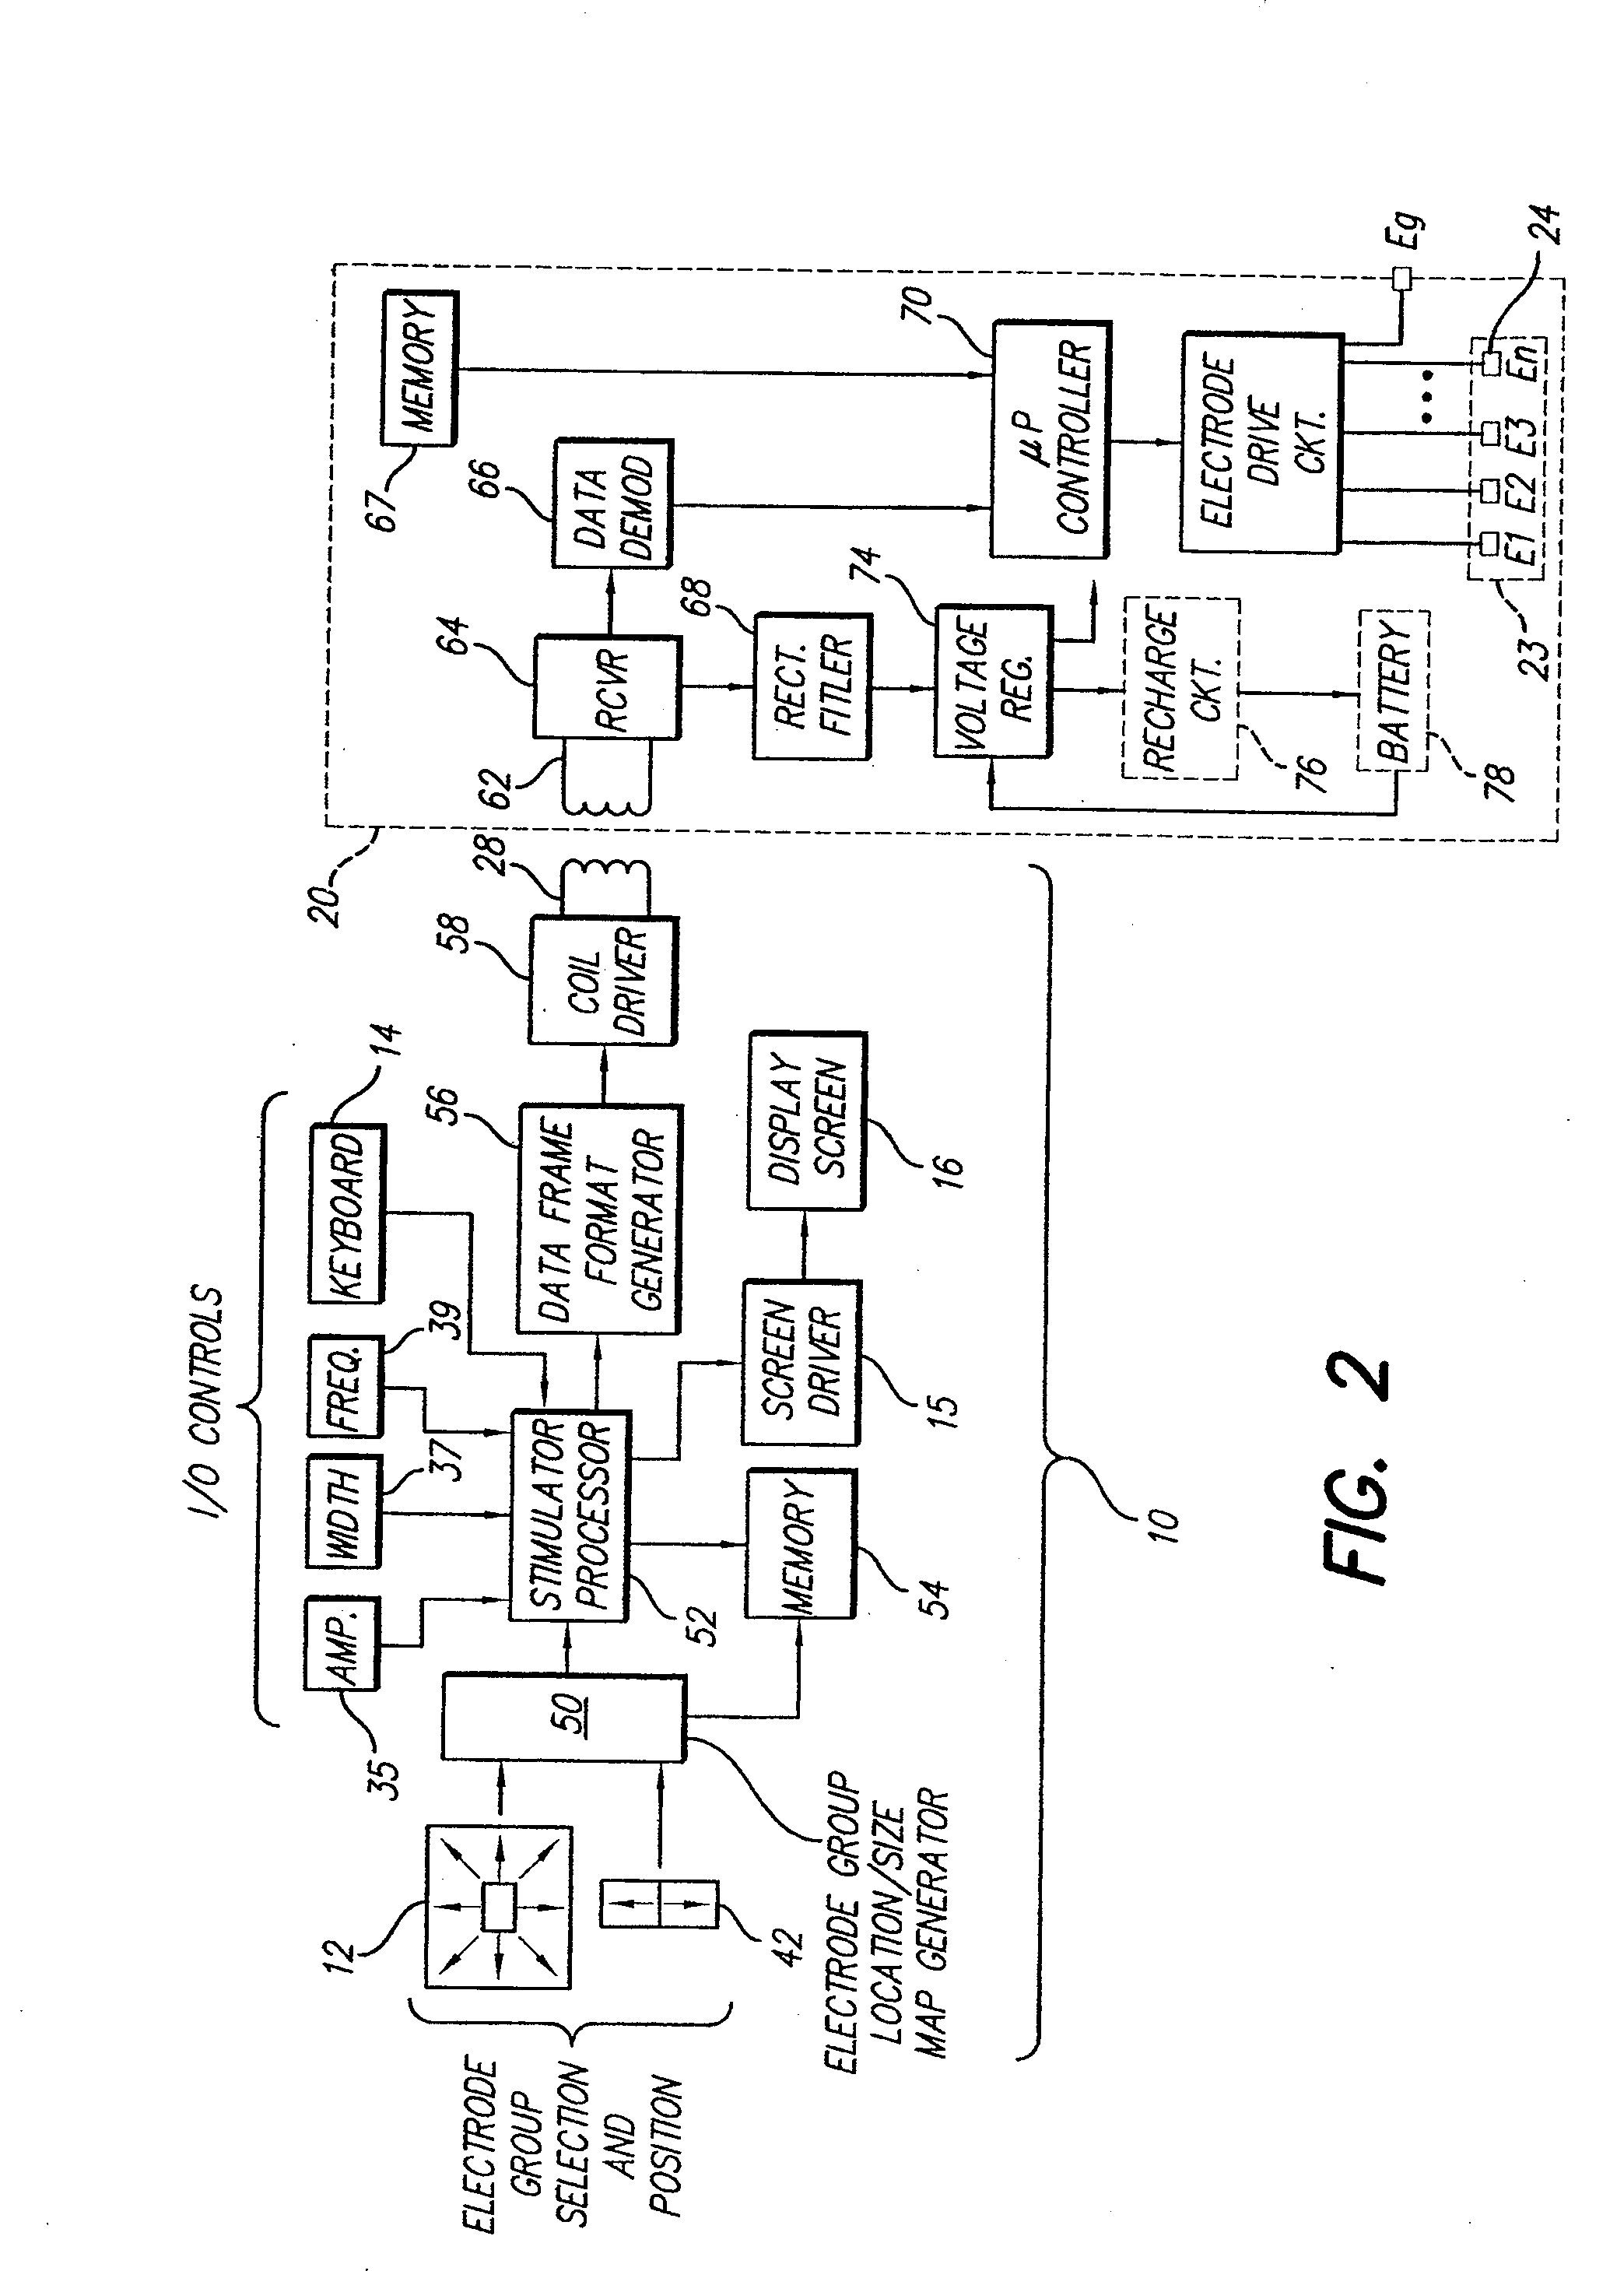 System and method for displaying stimulation field generated by electrode array